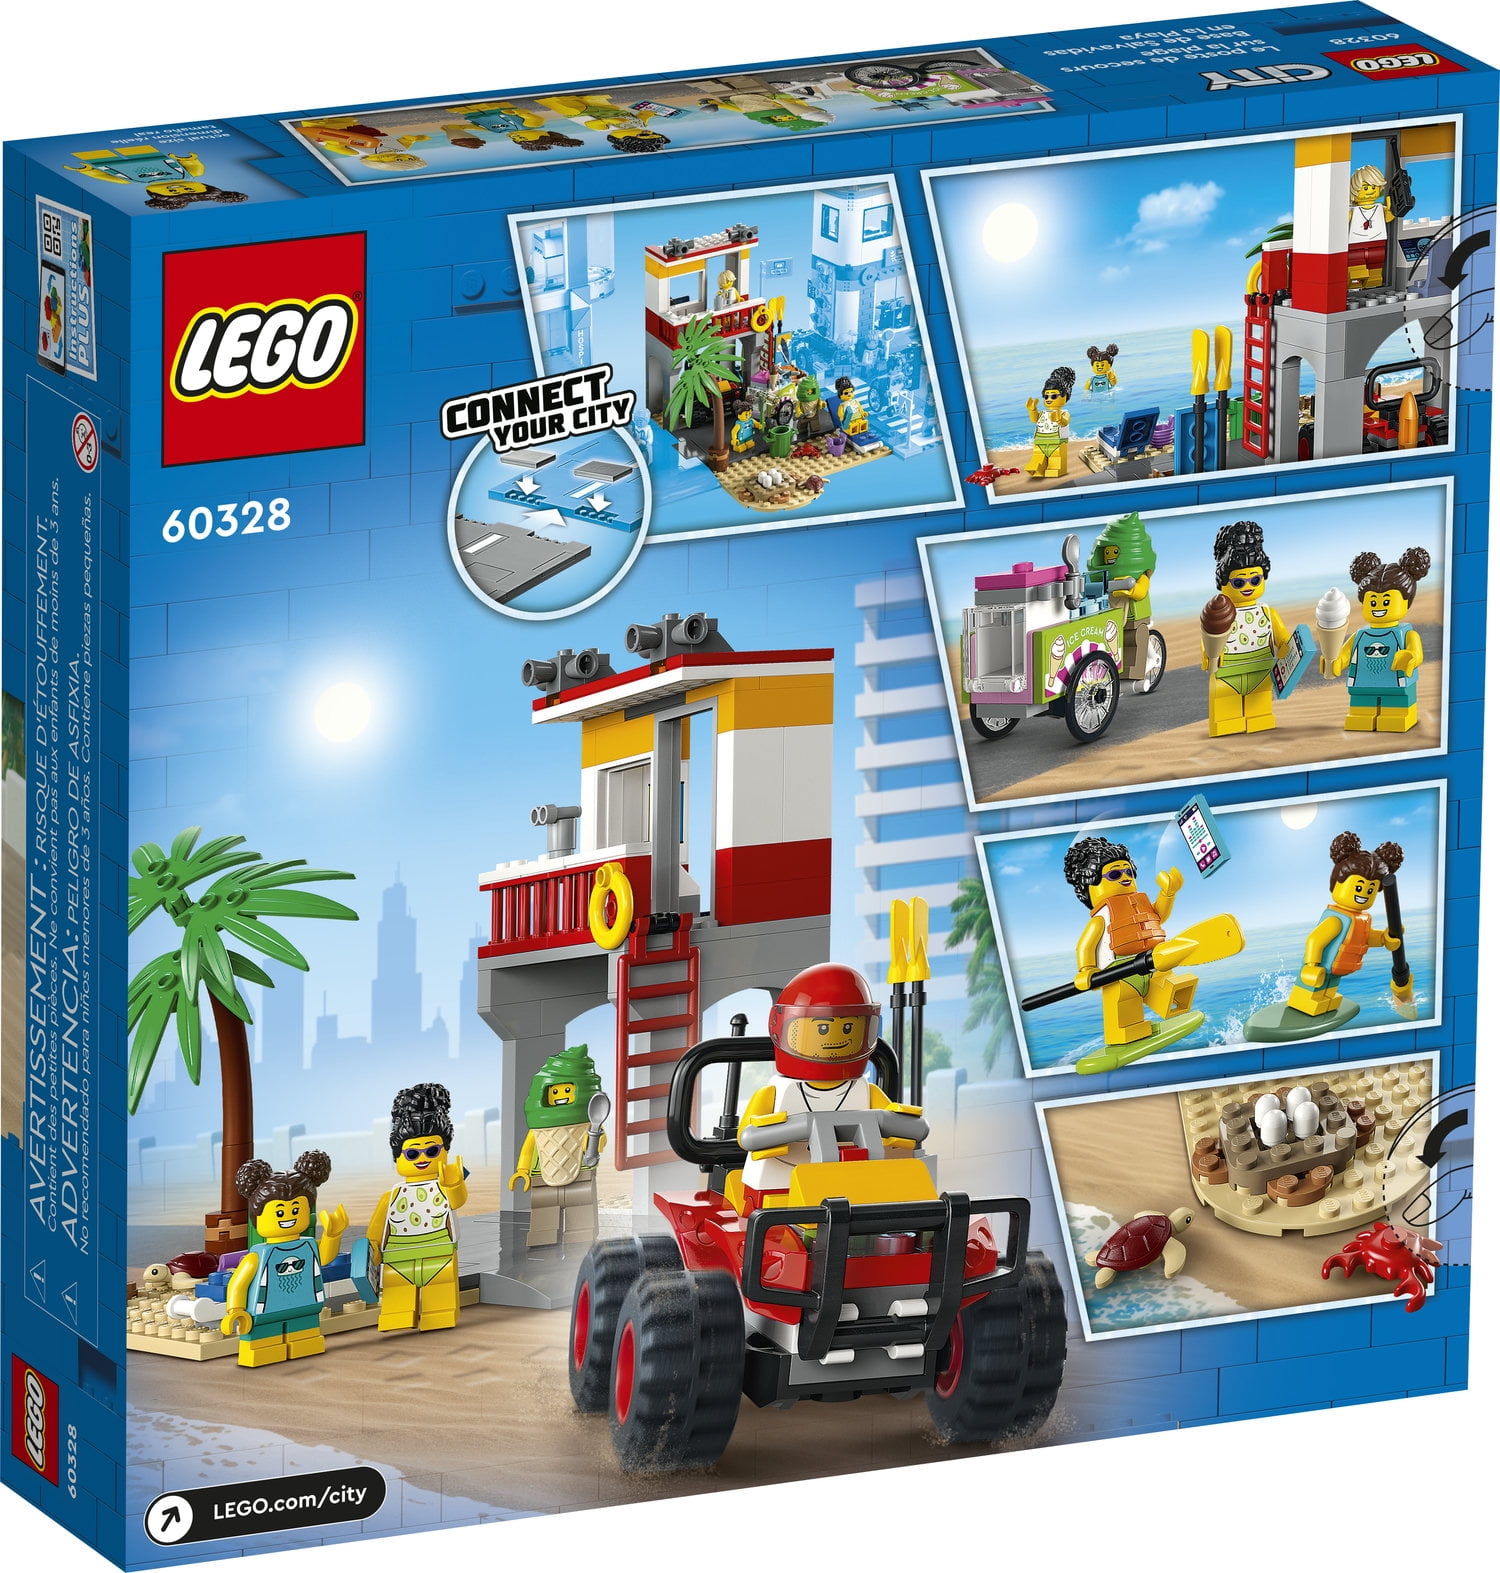 LEGO City Beach Lifeguard Station 60328 Building Kit for Ages 5+, 4 Minifigures and Crab and Turtle Figures (211 Pieces) -